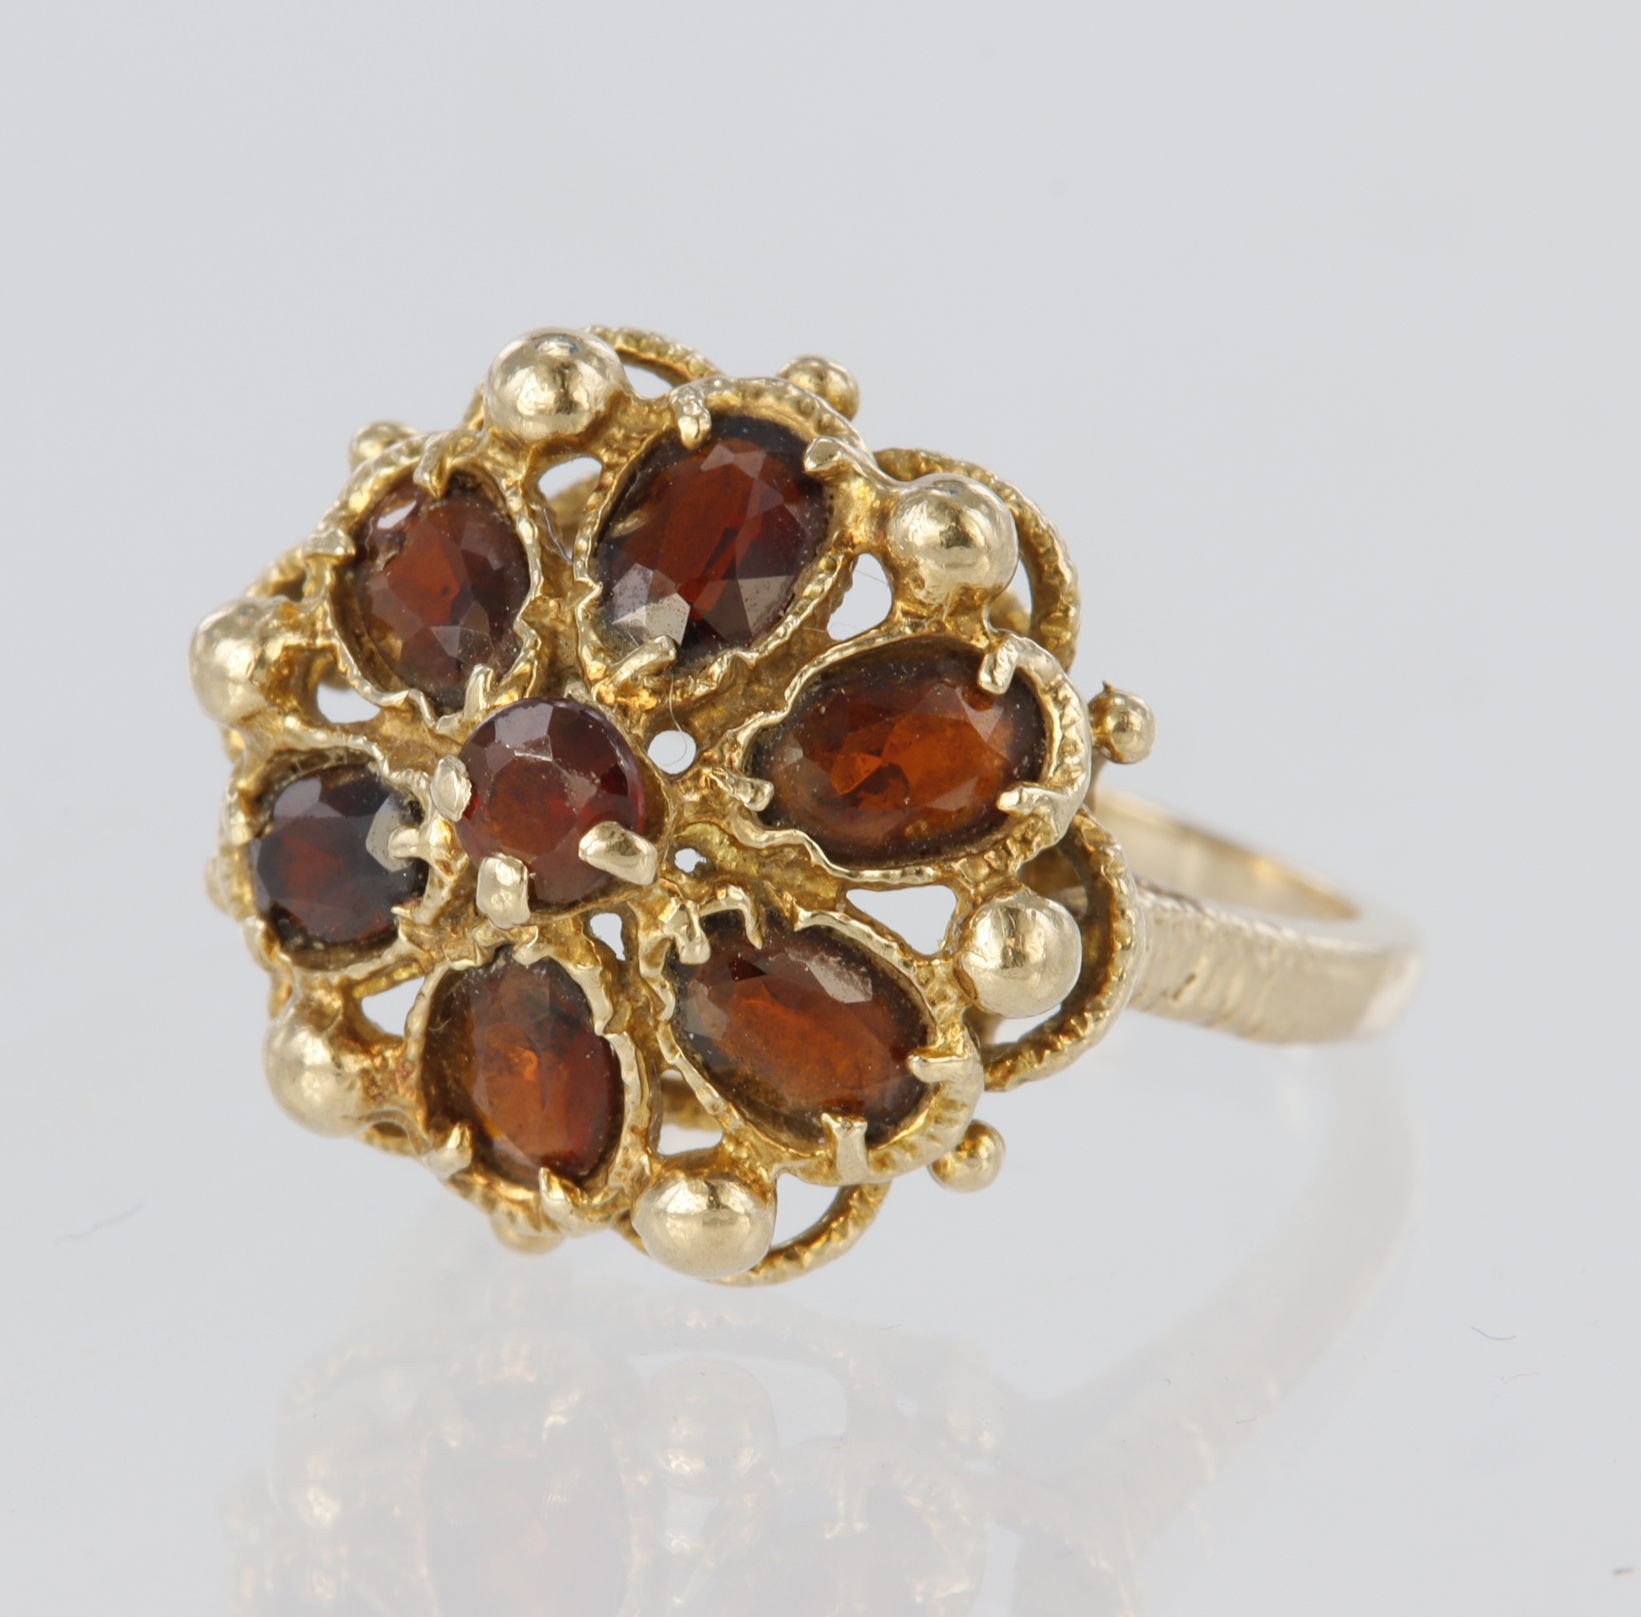 9ct yellow gold dress ring set with a central 2mm round garnet surrounded by six pear shaped garnets